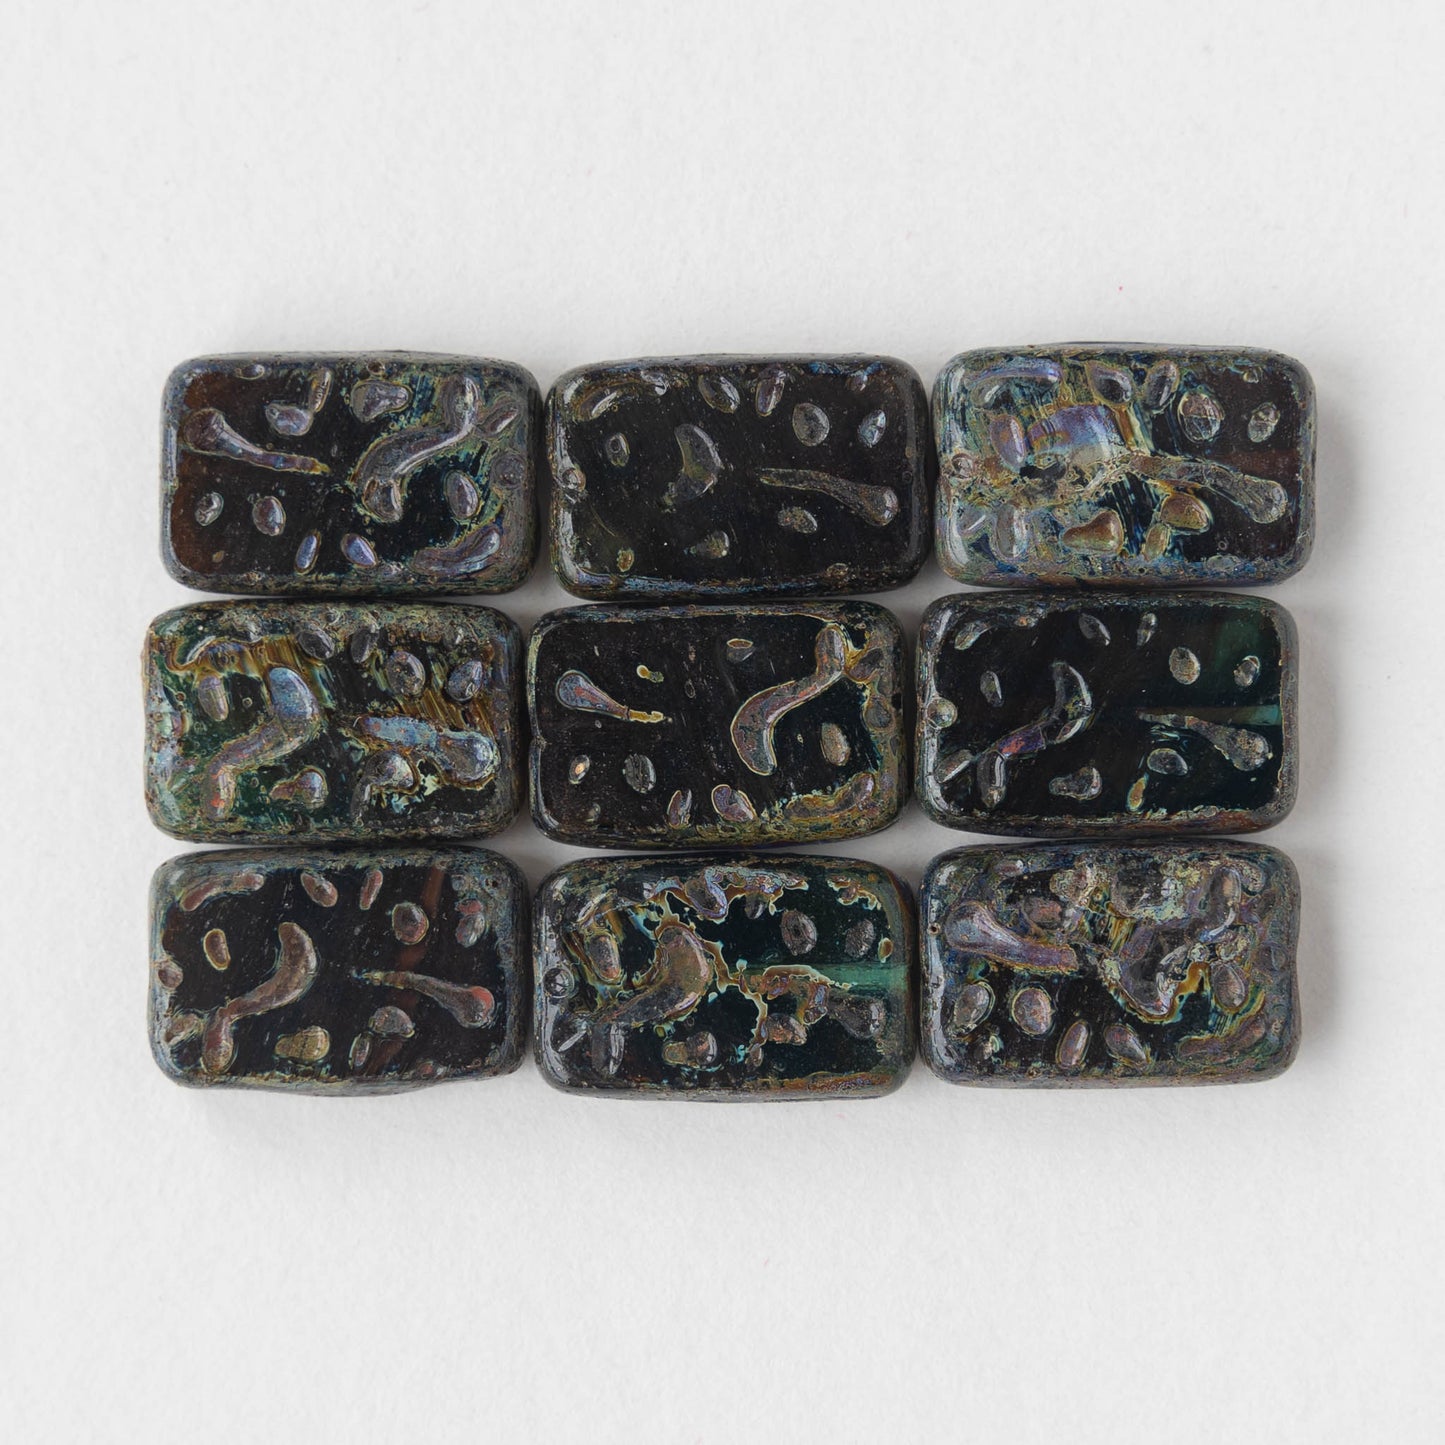 19mm Groovy Rectangle - Opaque Black Picasso - 10 Beads